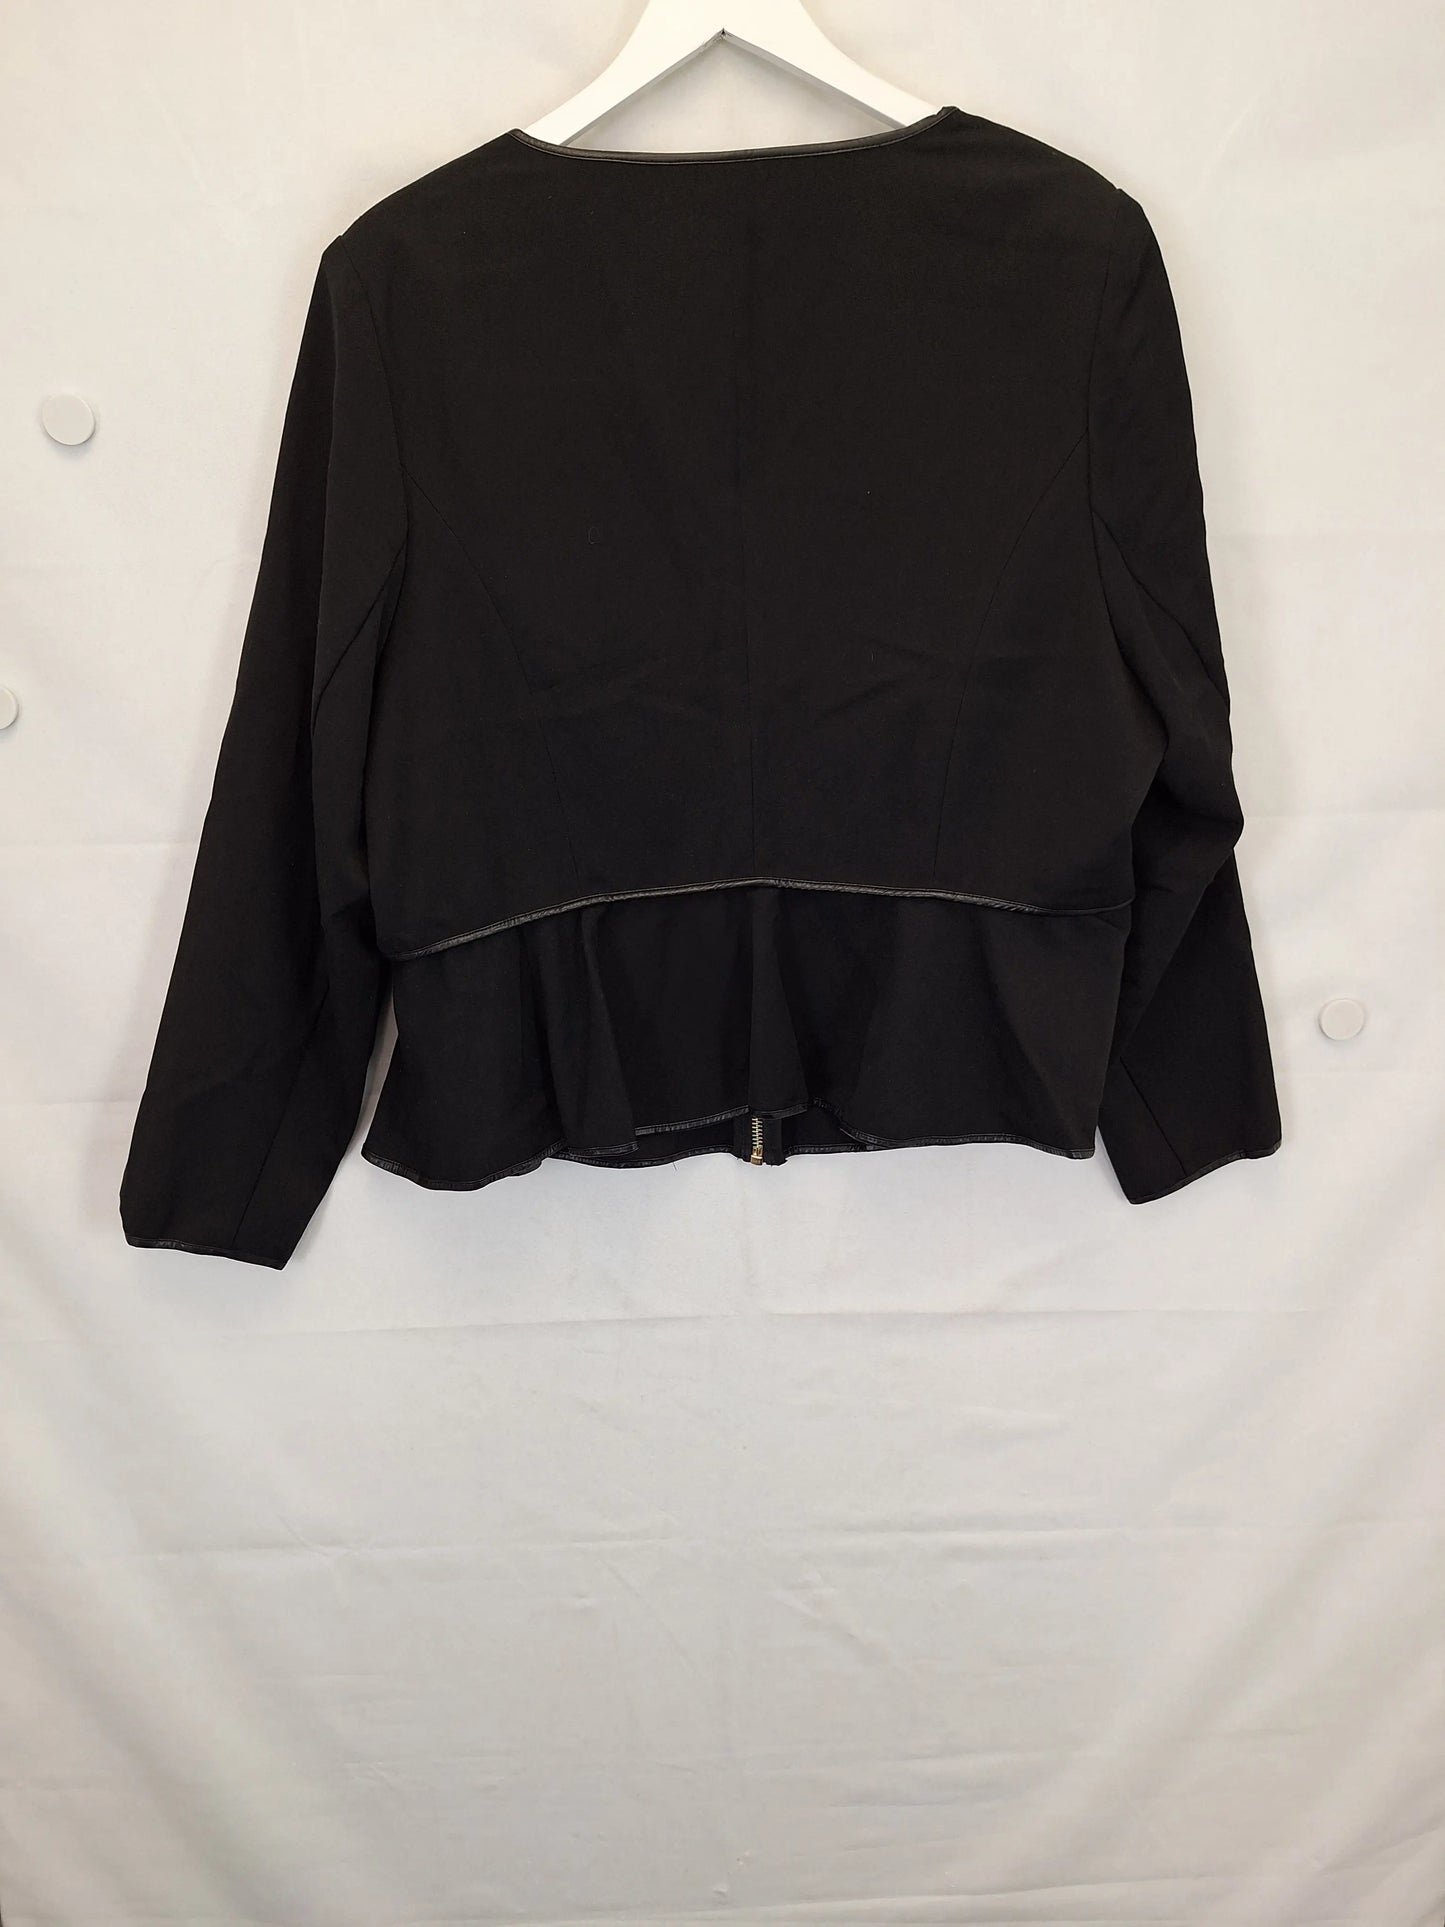 City Chic Trimmed Zipper Front Work Jacket Size XL Plus by SwapUp-Online Second Hand Store-Online Thrift Store